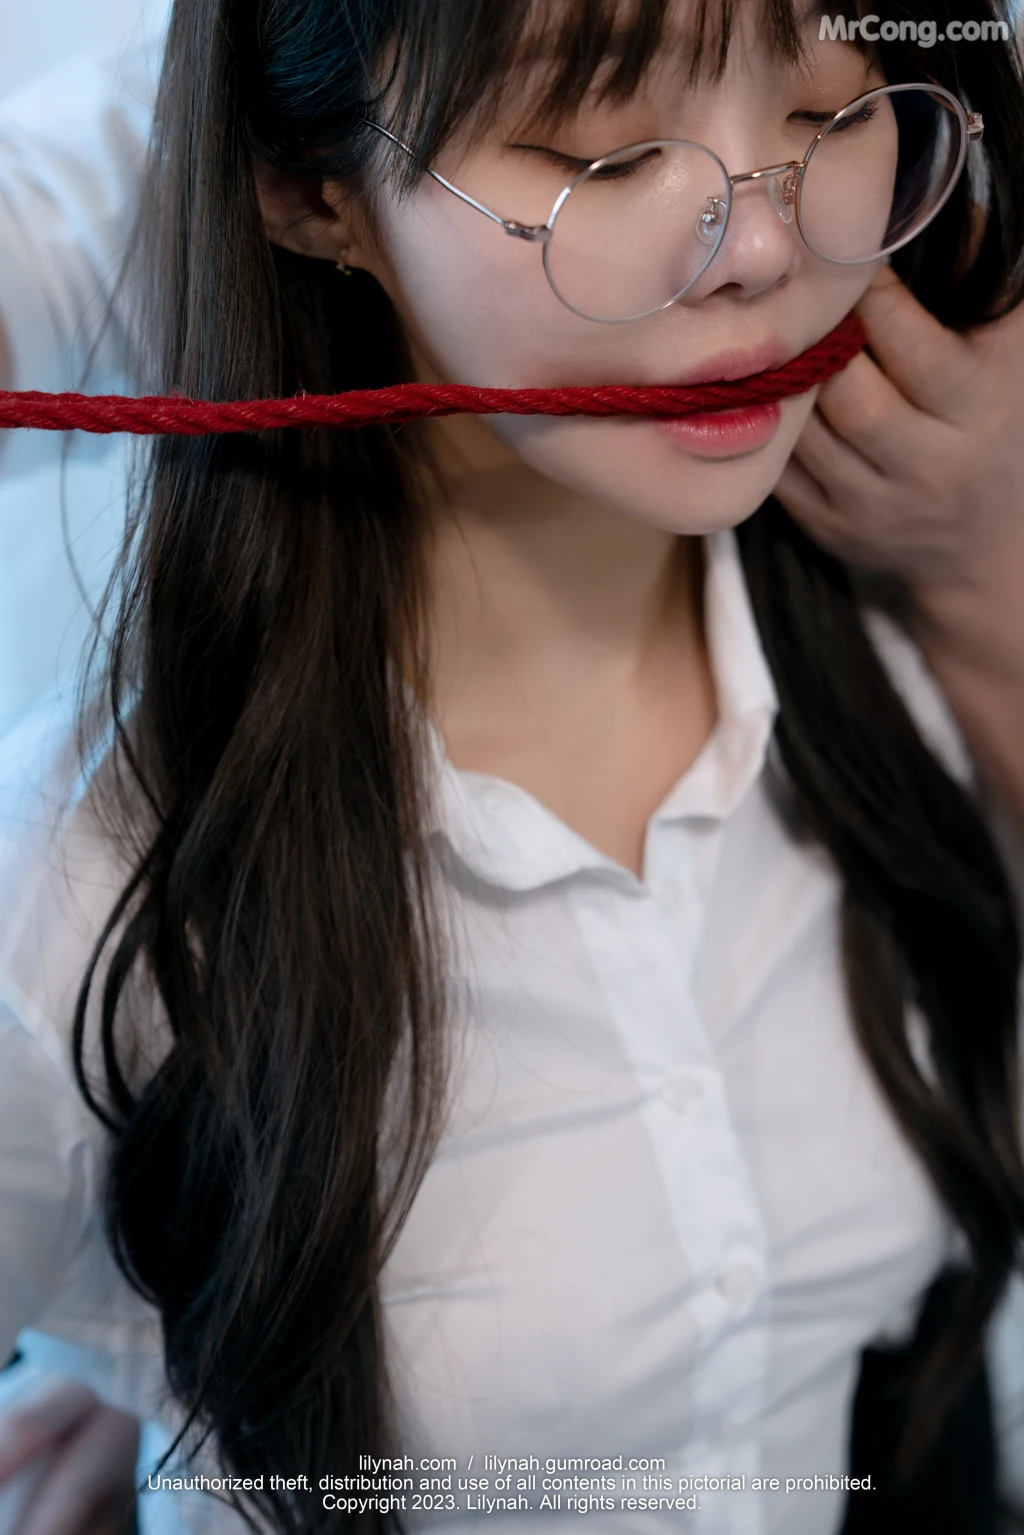 [Lilynah] LW072 Inah (이나): Vol.31 The Rope Play (101 photos) photo 1-5